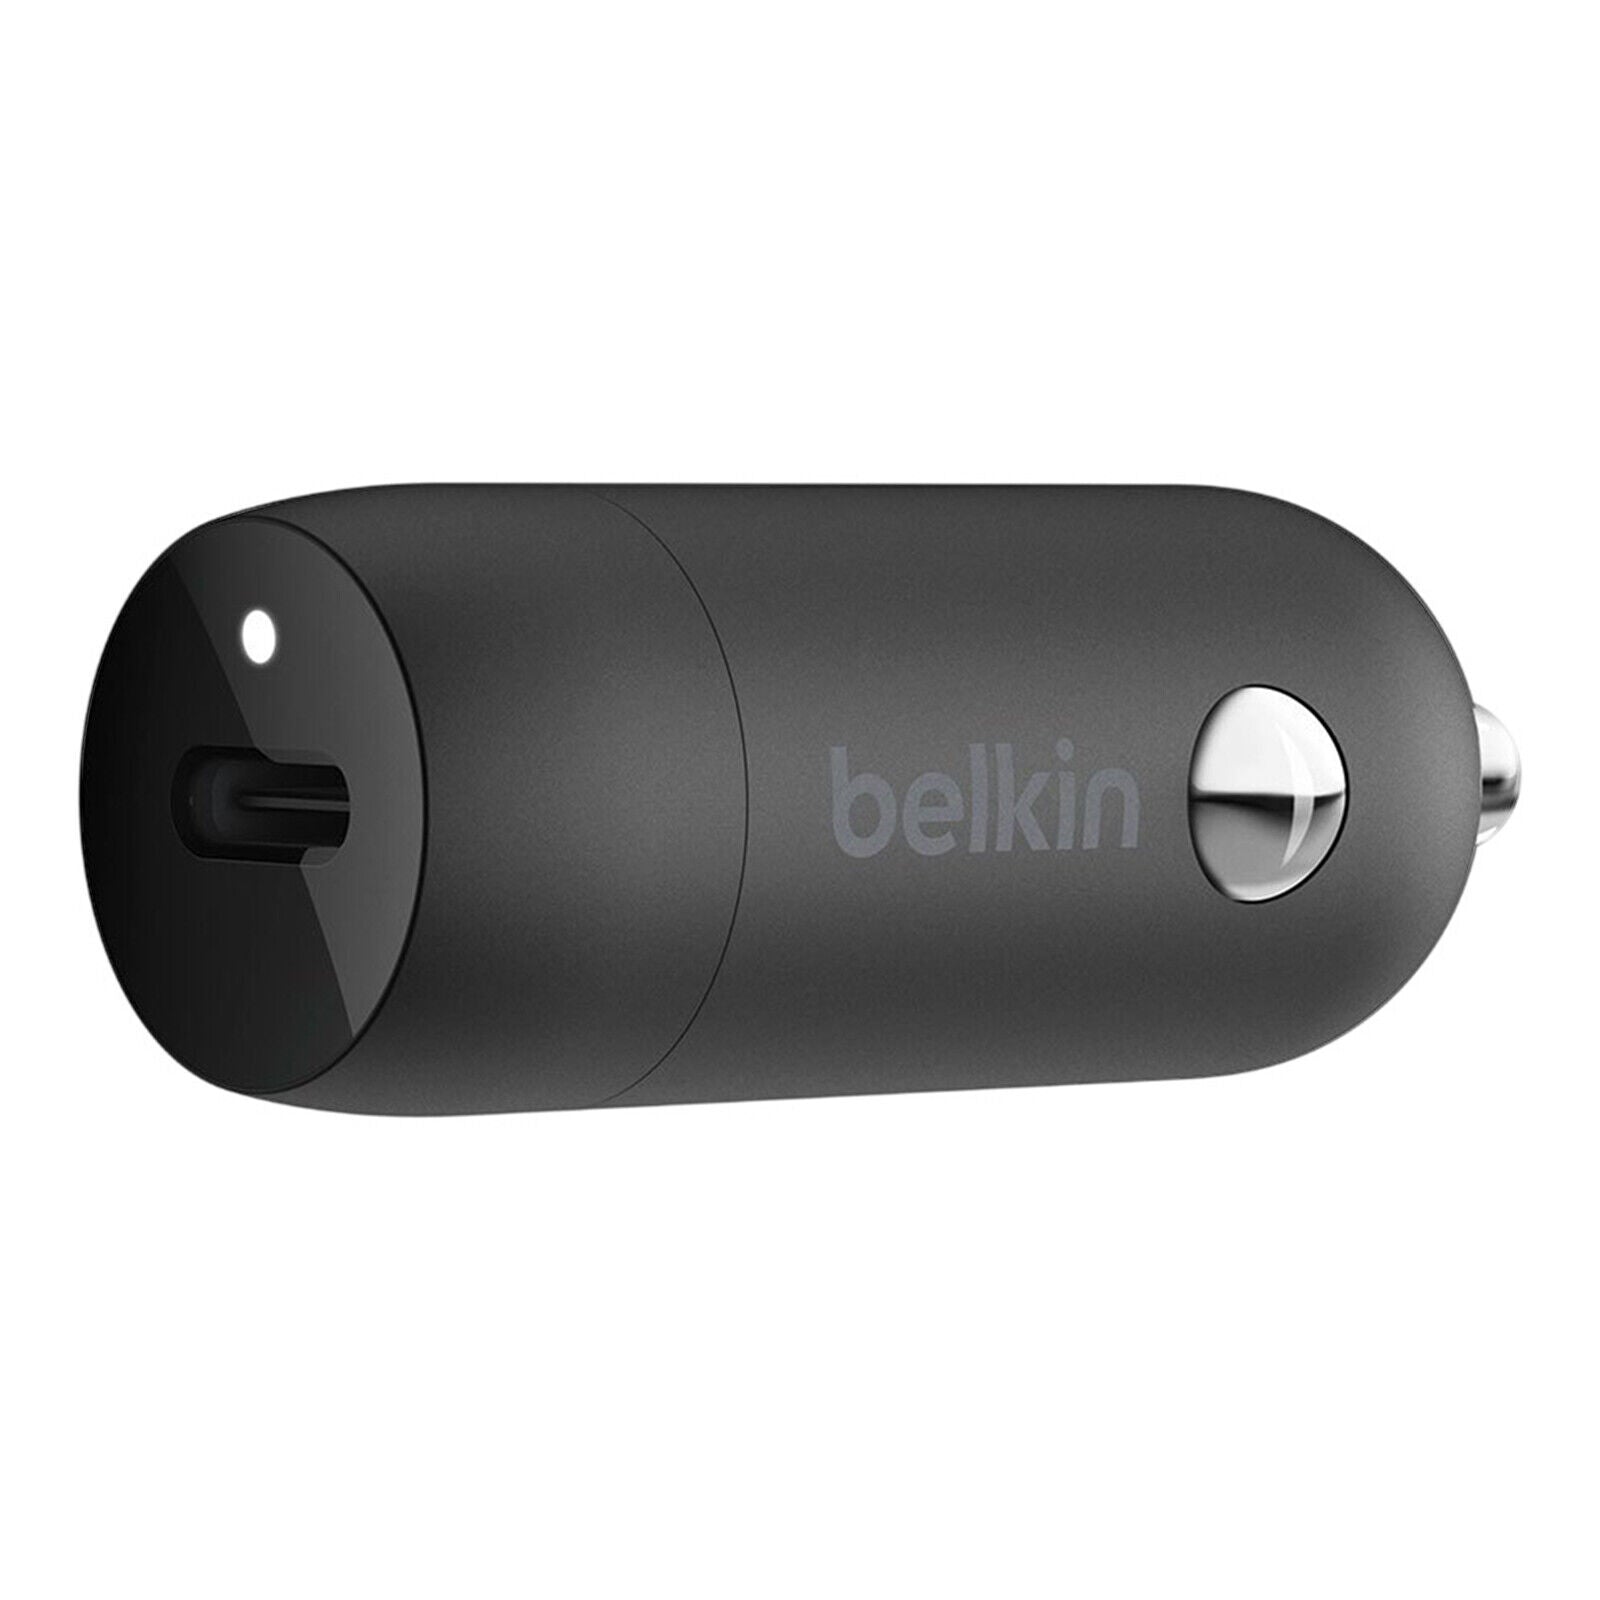 Belkin 20W USB-C Power Delivery Car Charger - Black